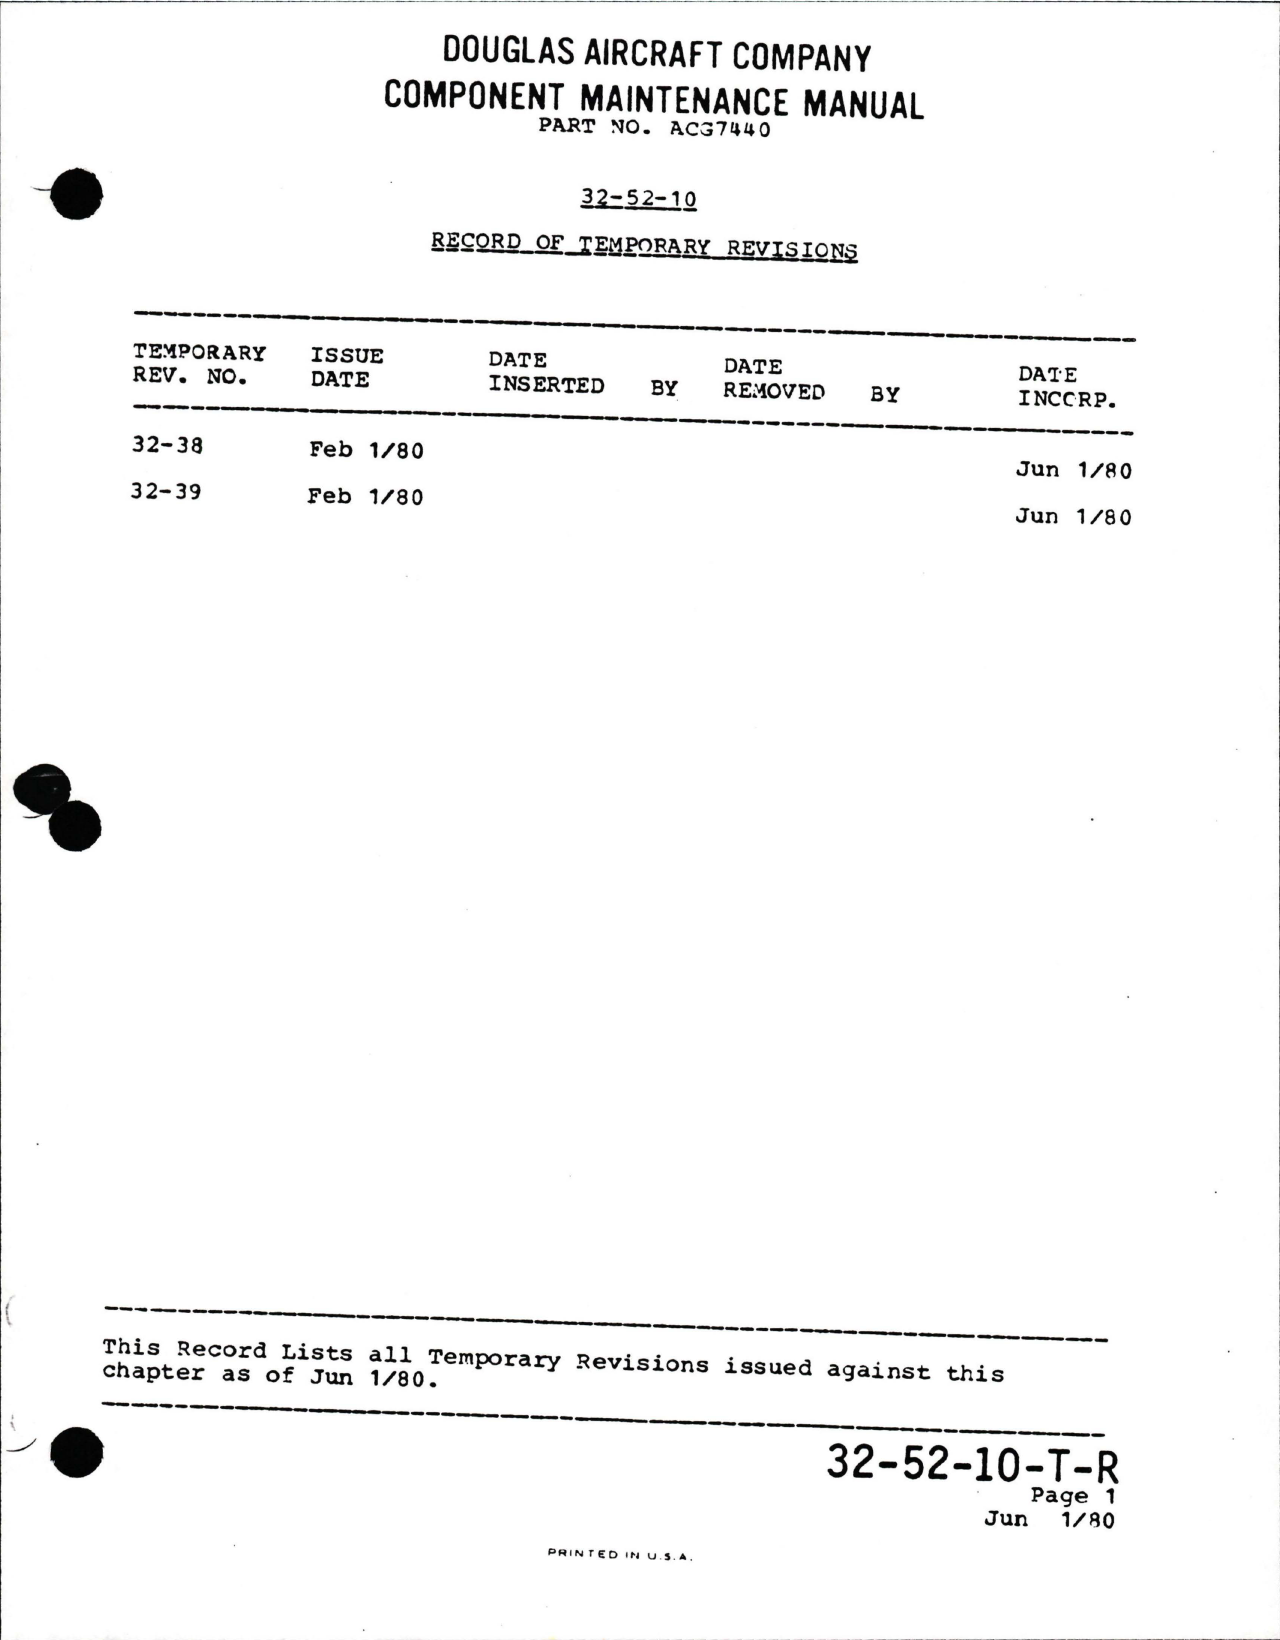 Sample page 7 from AirCorps Library document: Maintenance Manual for NLG Steering Cylinder Assembly - Part ACG7440-5501 and ACG7440-5503